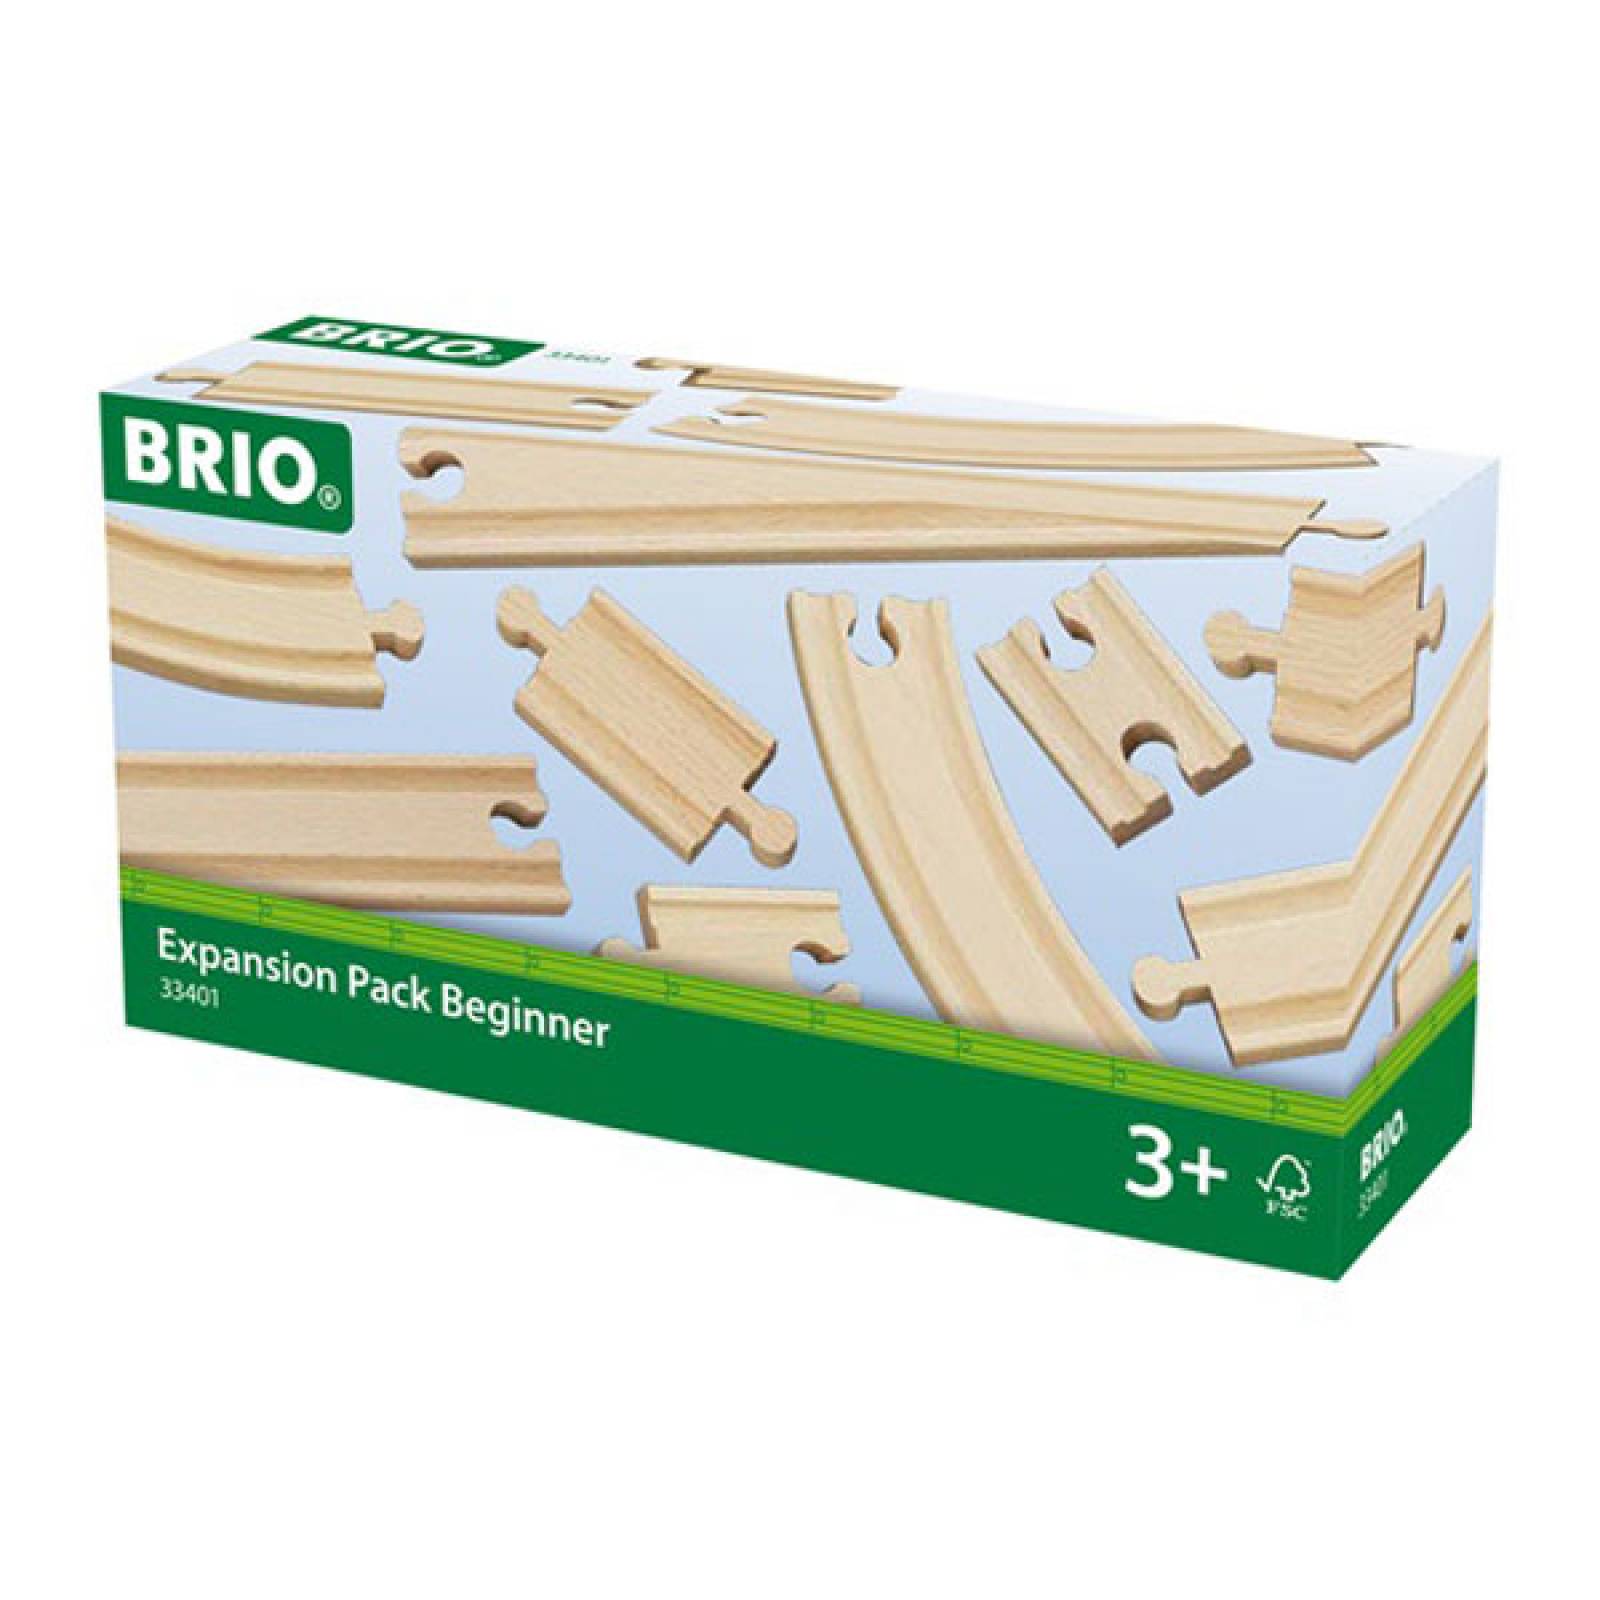 Expansion Pack Beginner  BRIO Wooden Railway Age 3+ thumbnails